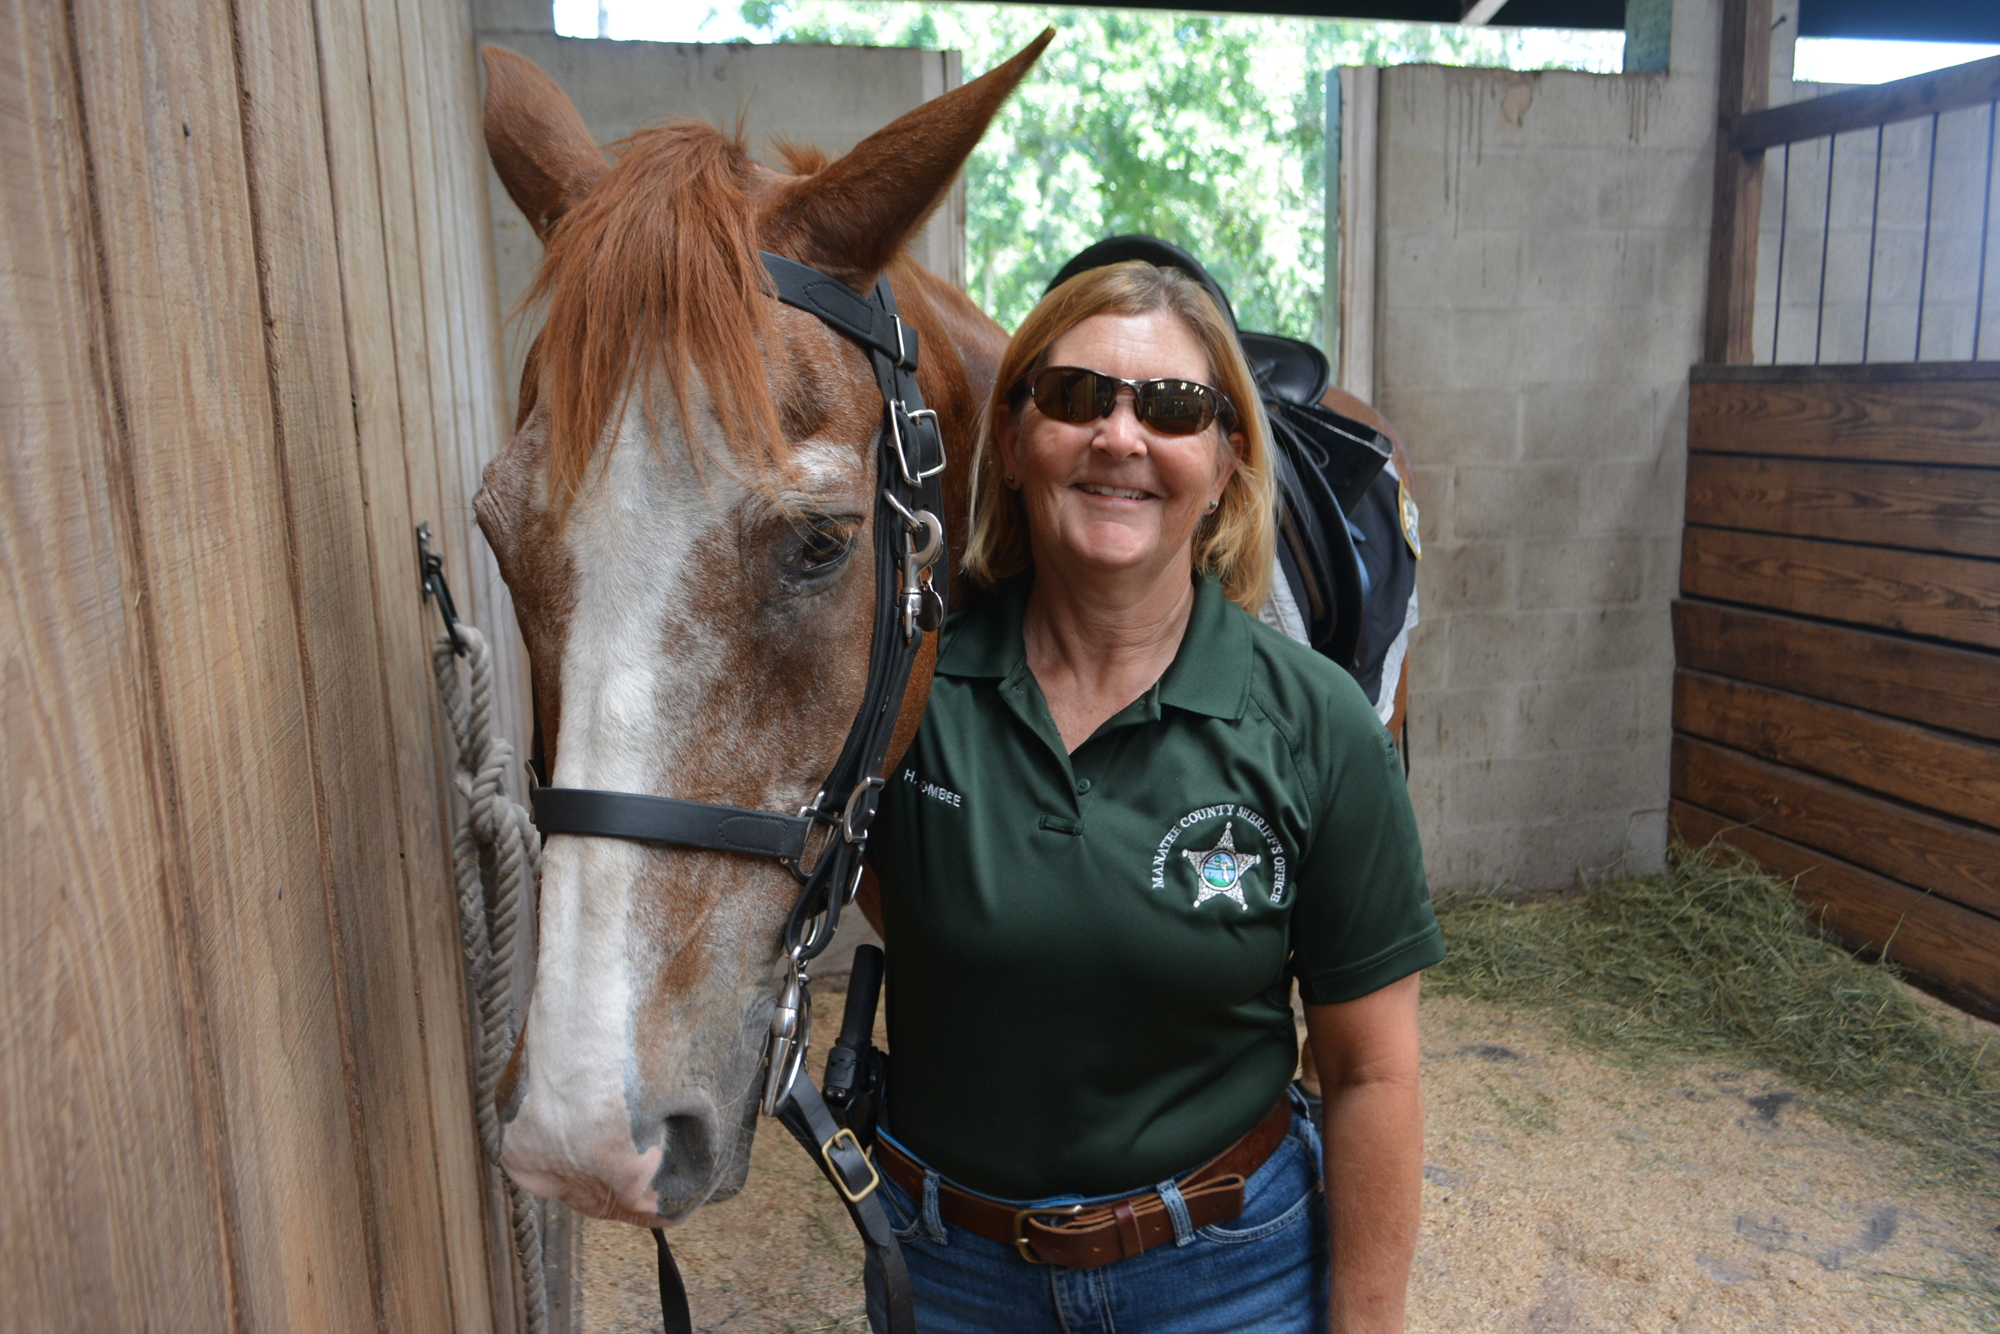 Deputy Holly Combee is in charge of the Mounted Patrol Unit at the Florida Sheriffs Youth Ranch.